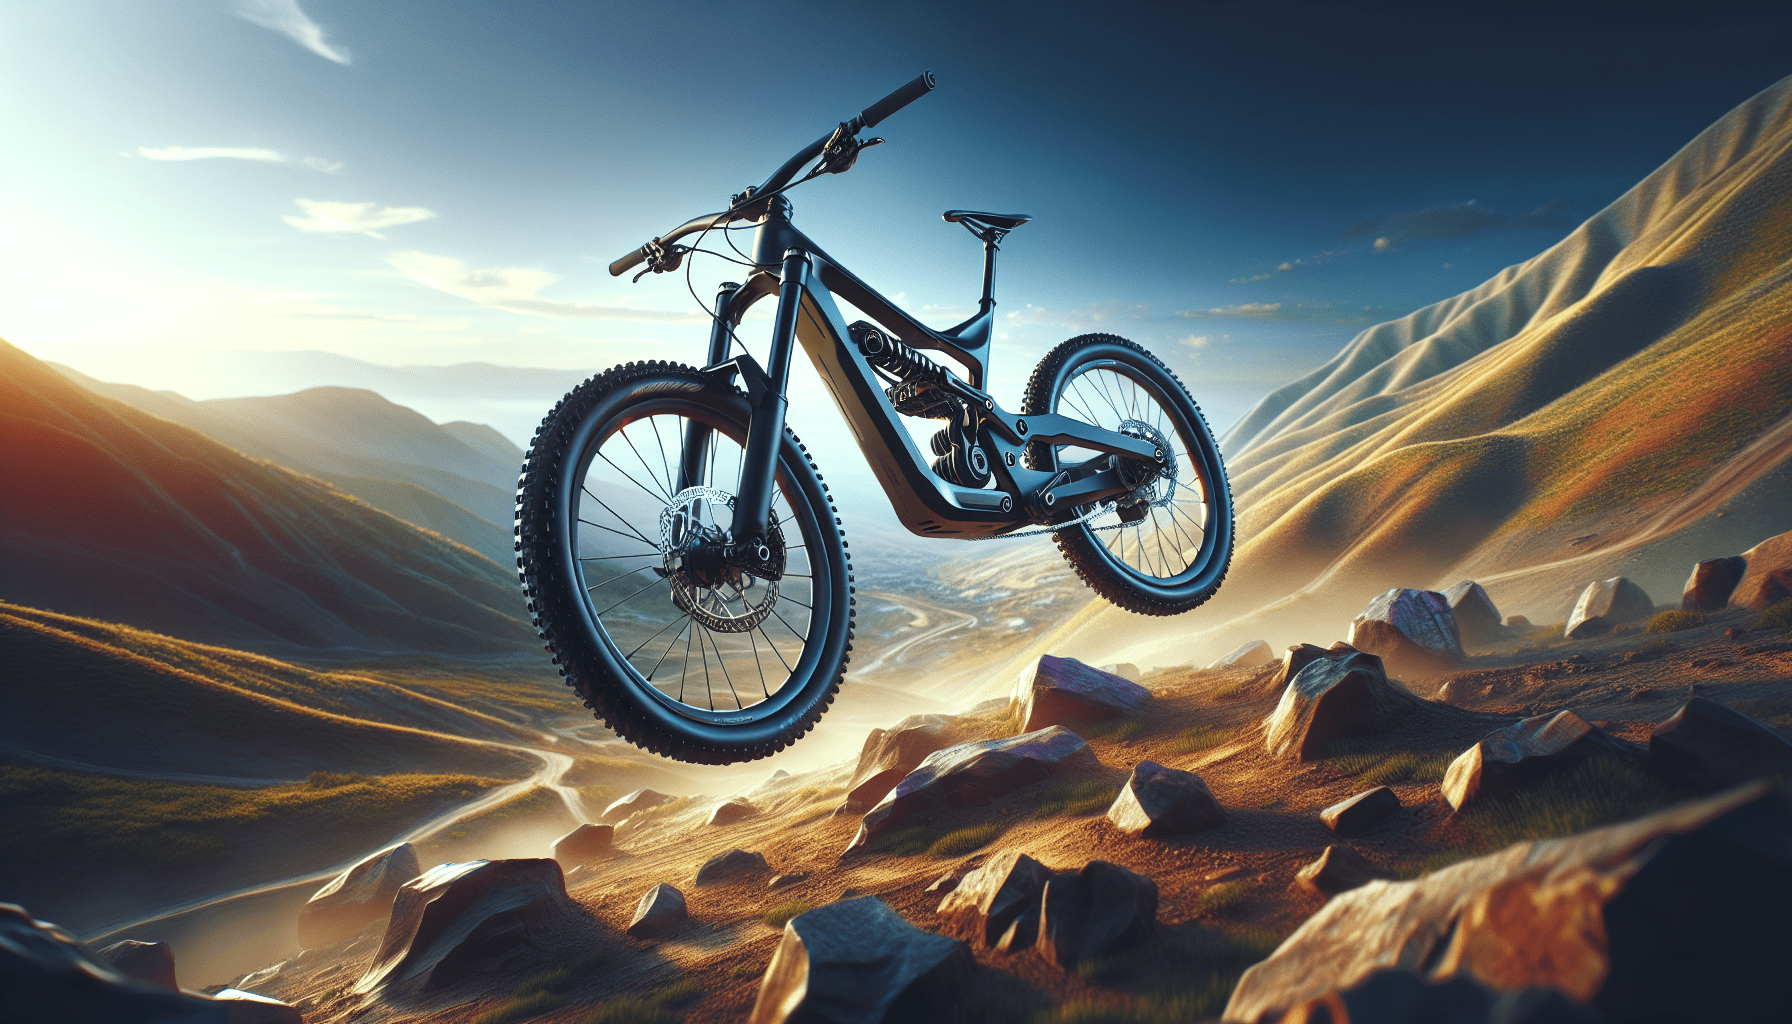 Take Your Off-Road Game To The Next Level With These Top 3 Carbon Bikes!